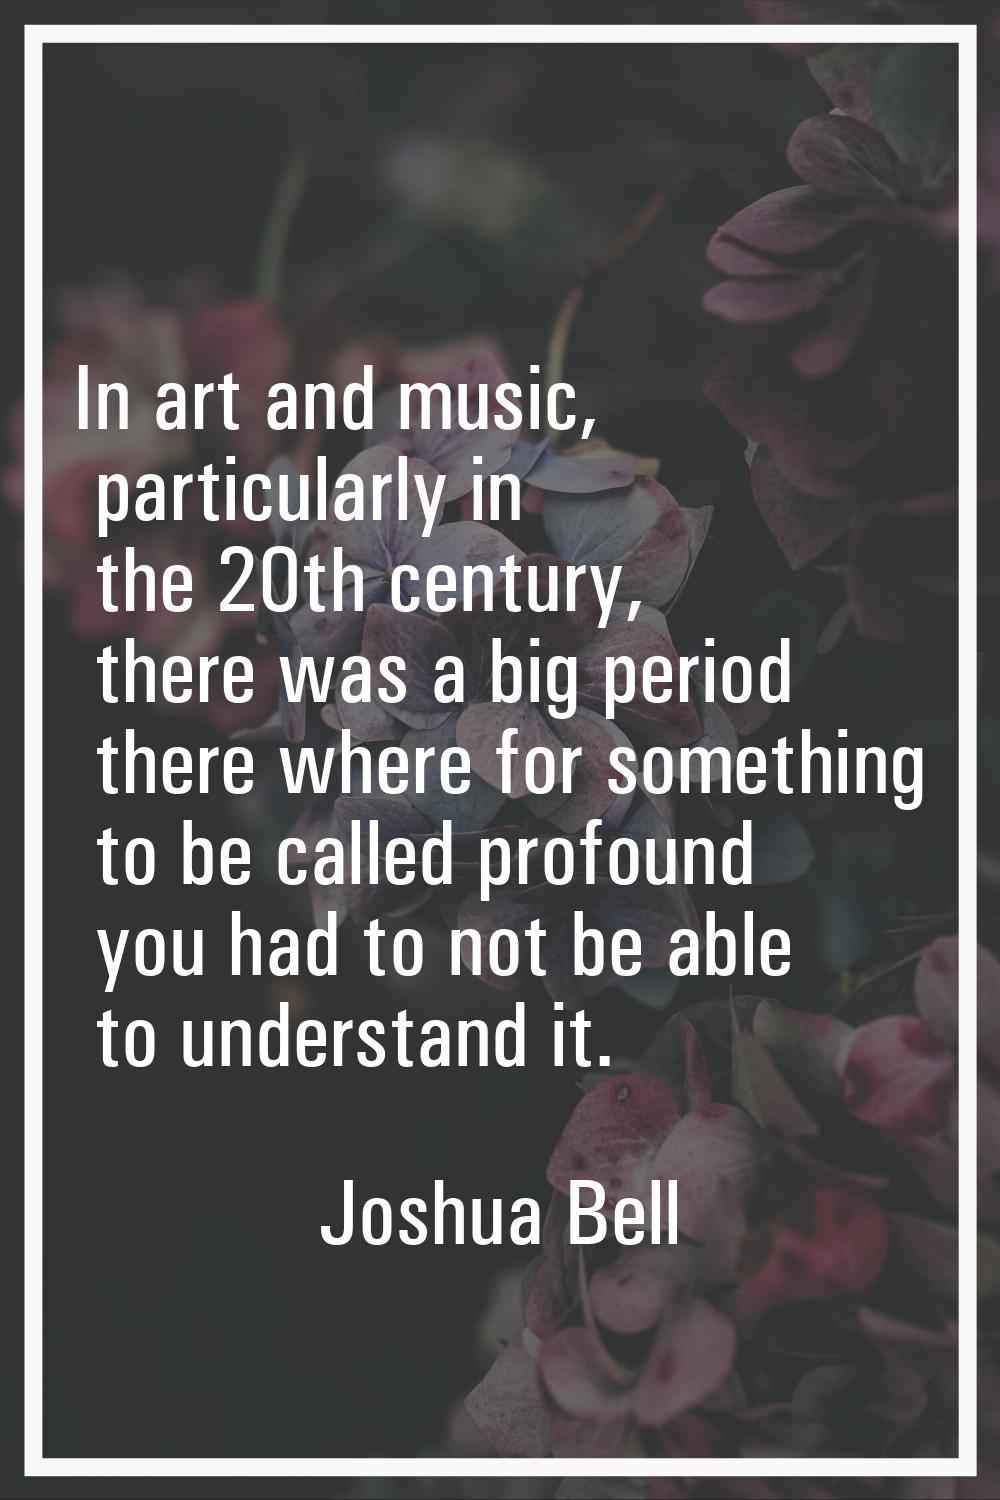 In art and music, particularly in the 20th century, there was a big period there where for somethin